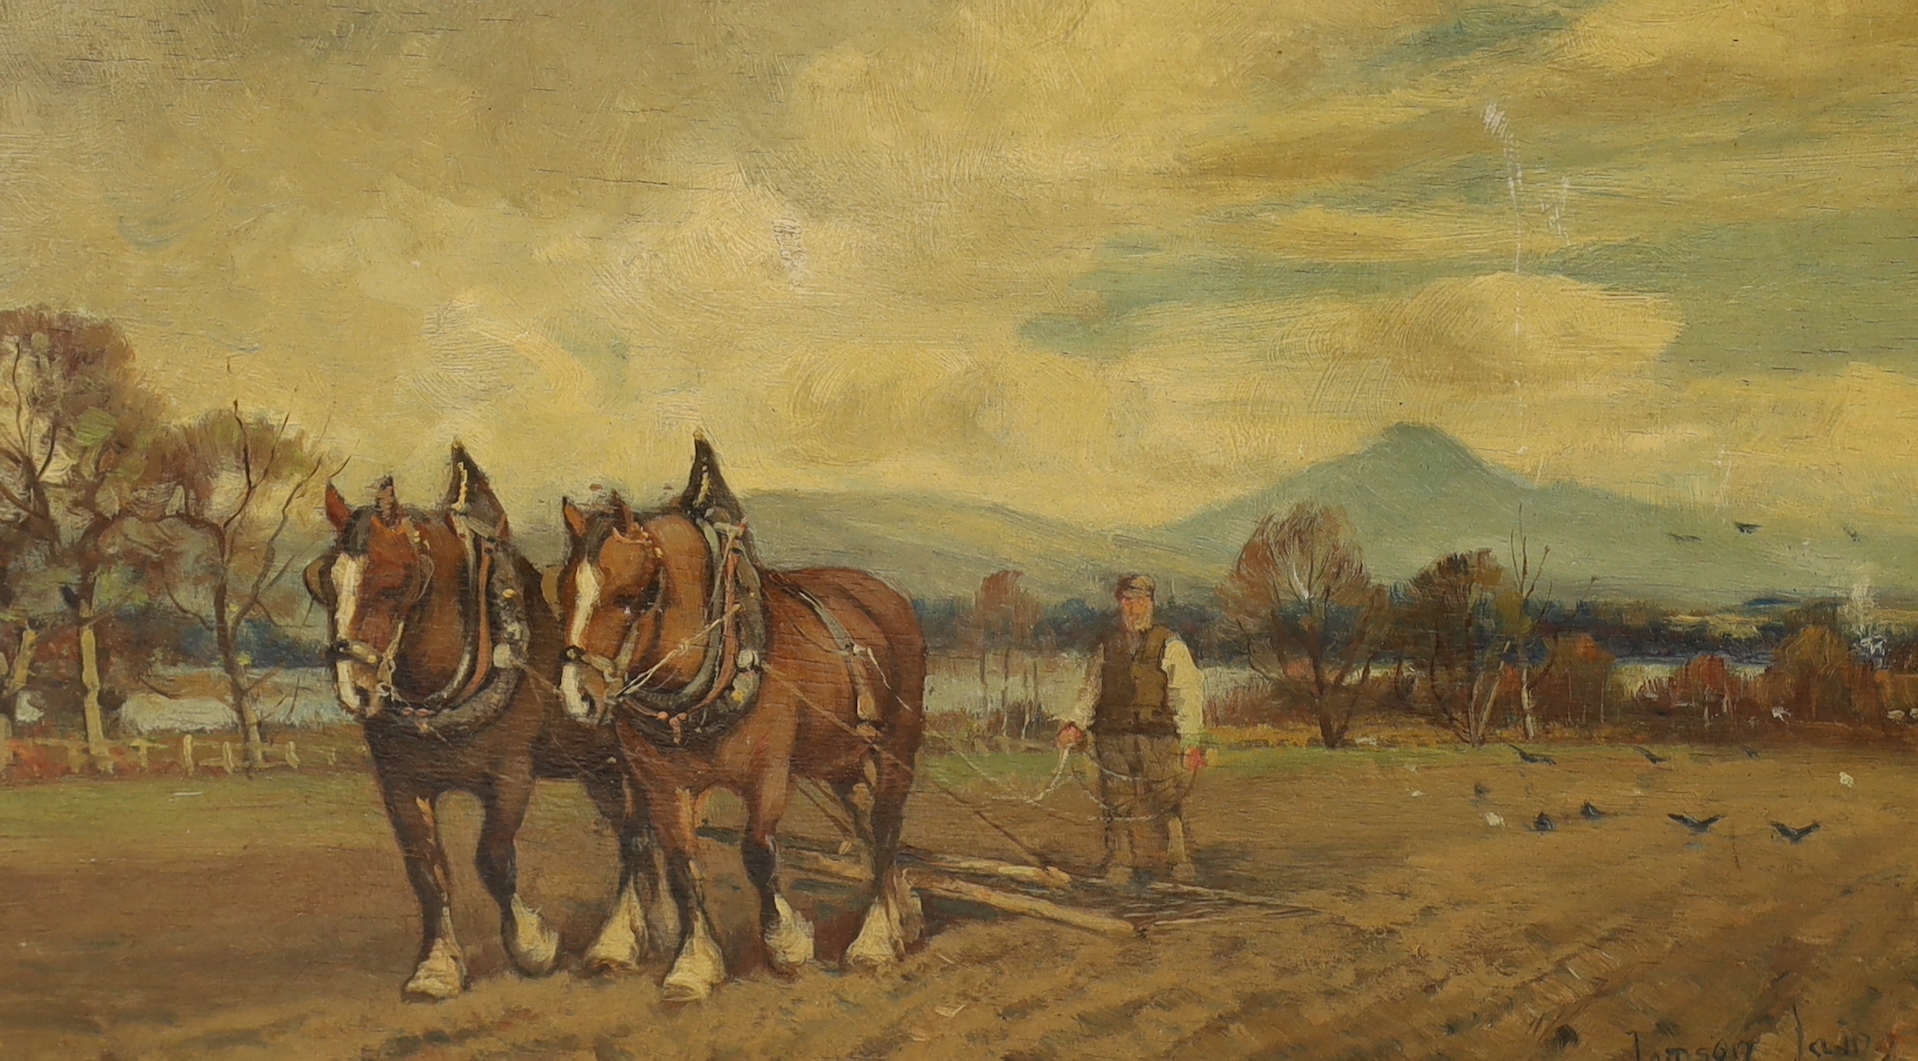 Tomson Laing (fl. 1890-1904), oil on board, Work horses and figure ploughing, signed, 19 x 34cm